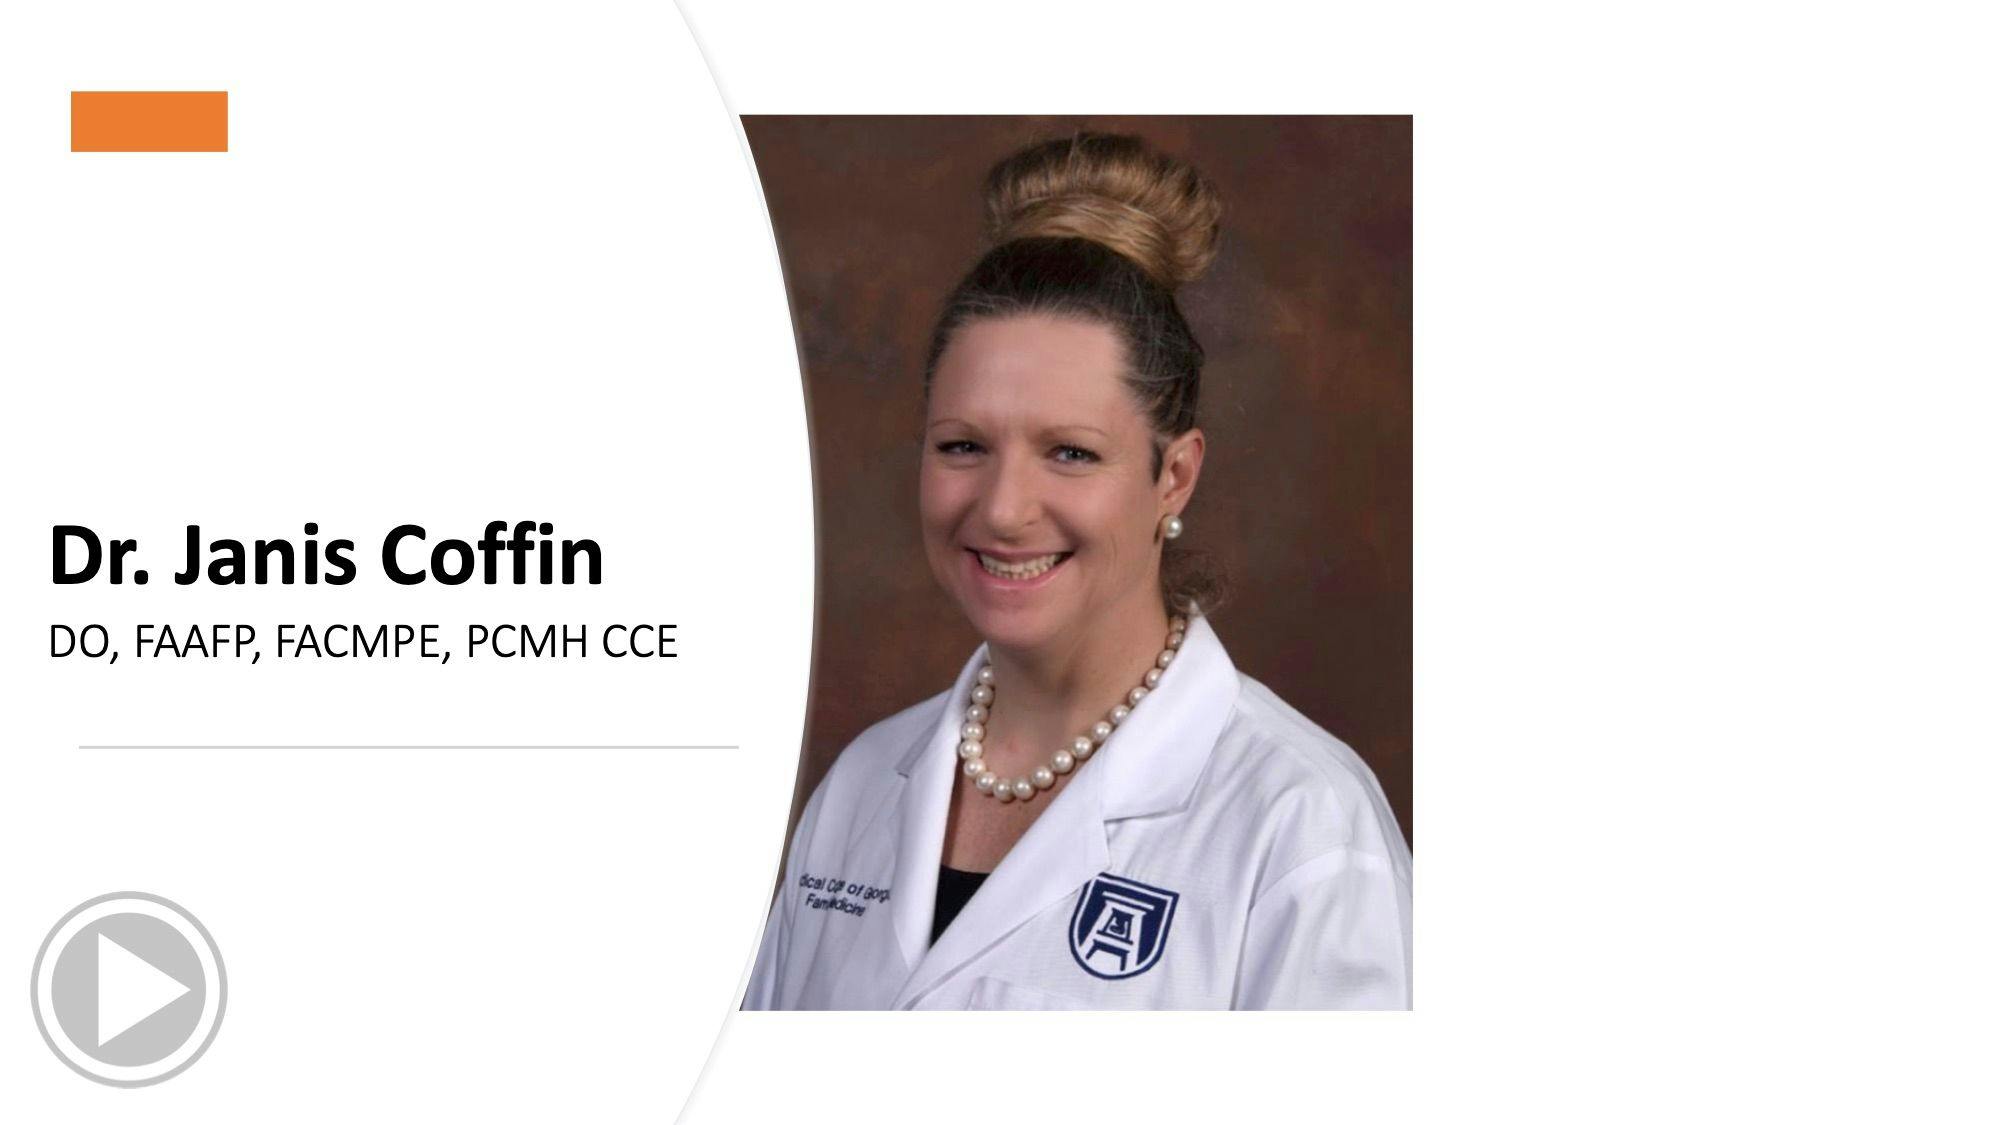 Dr. Janis Coffin, DO, FAAFP, FACMPE, PCMH CCE, gives expert advice